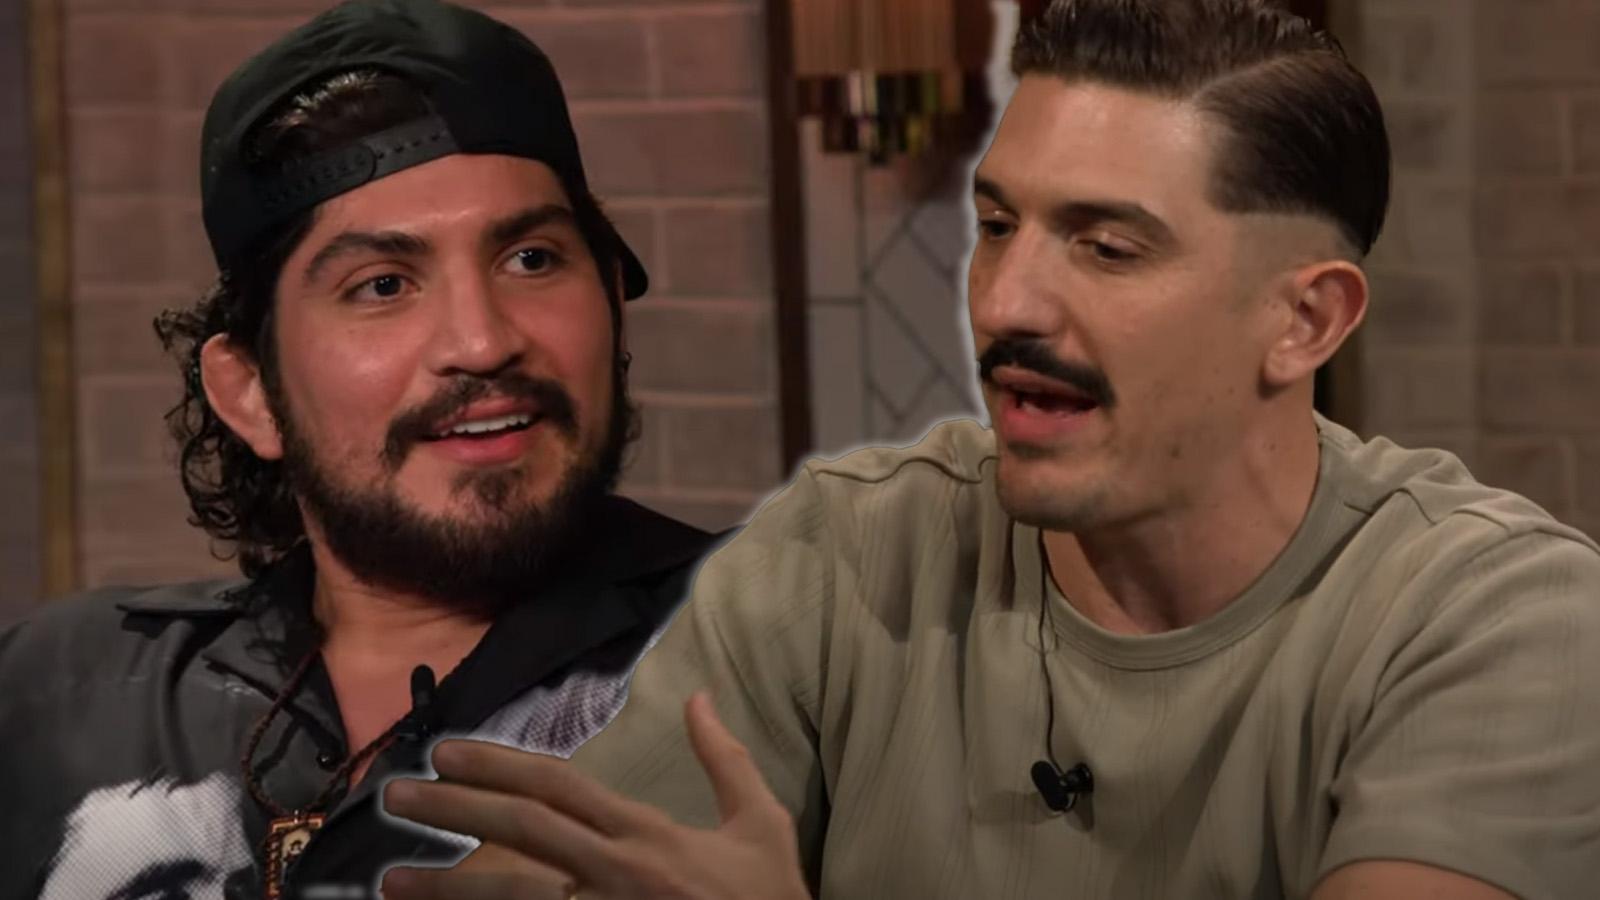 Dillon Danis on the left, Andrew Schulz on the right